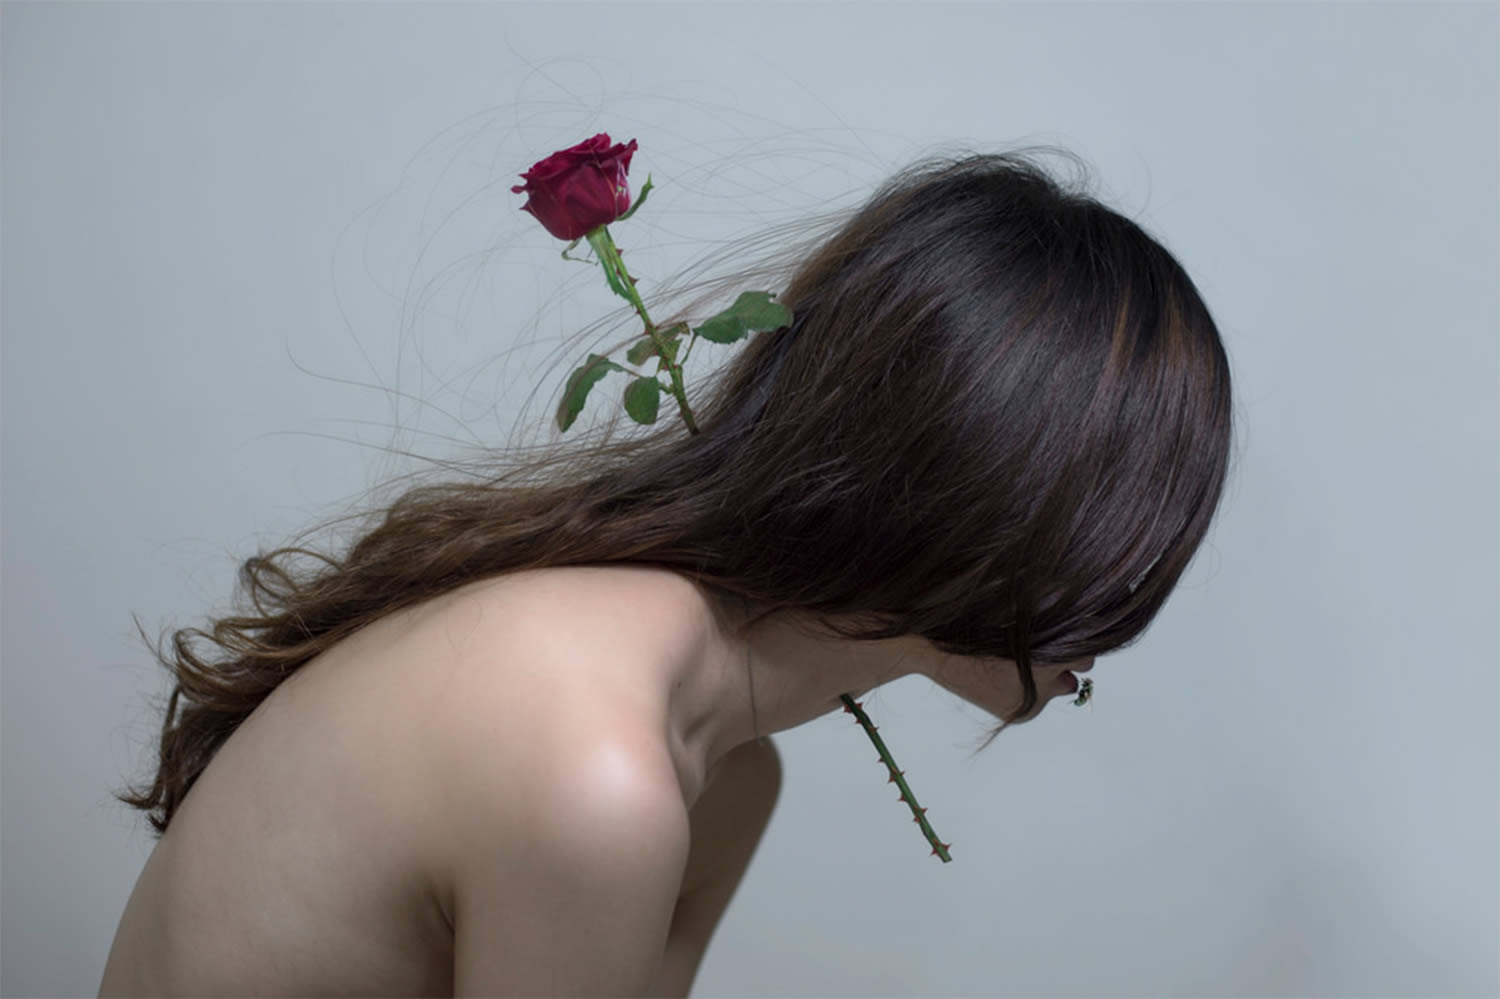 red rose through neck, photo by yung cheng lin